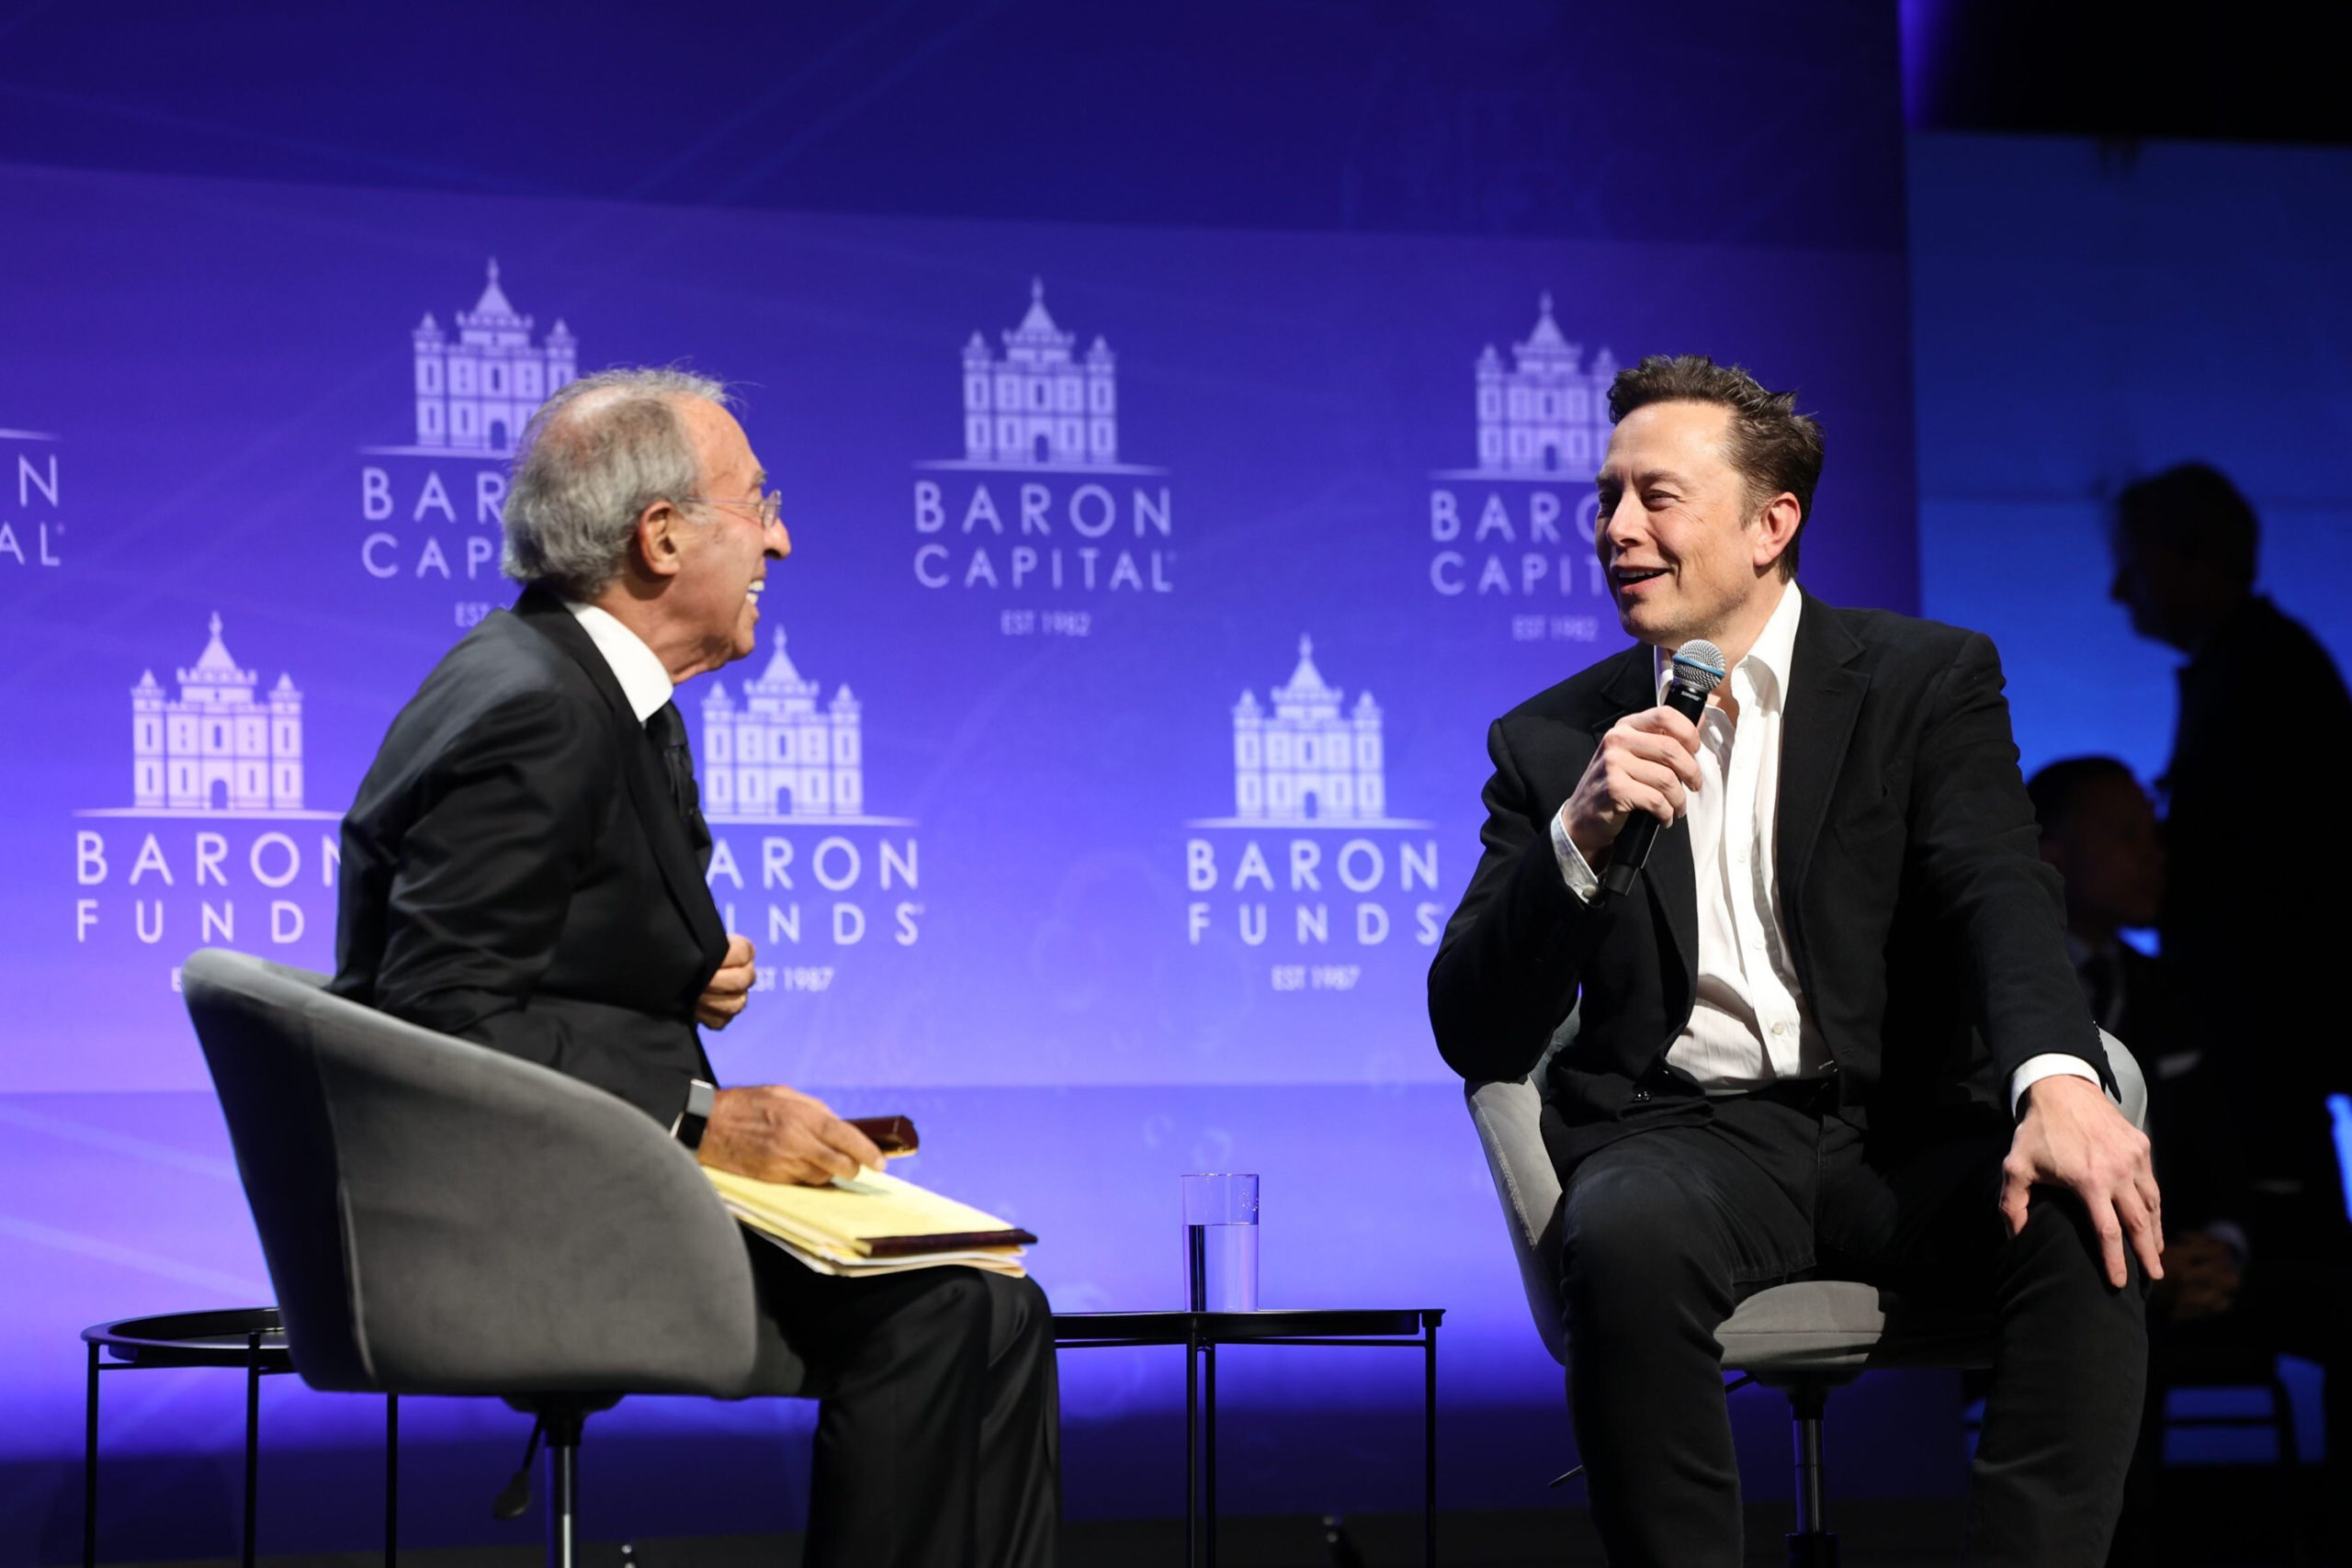 Baron Capital Group Chairman and CEO Ron Baron interviews Tesla CEO Elon Musk at the 29th Annual Baron Investment Conference in New York City on Friday.